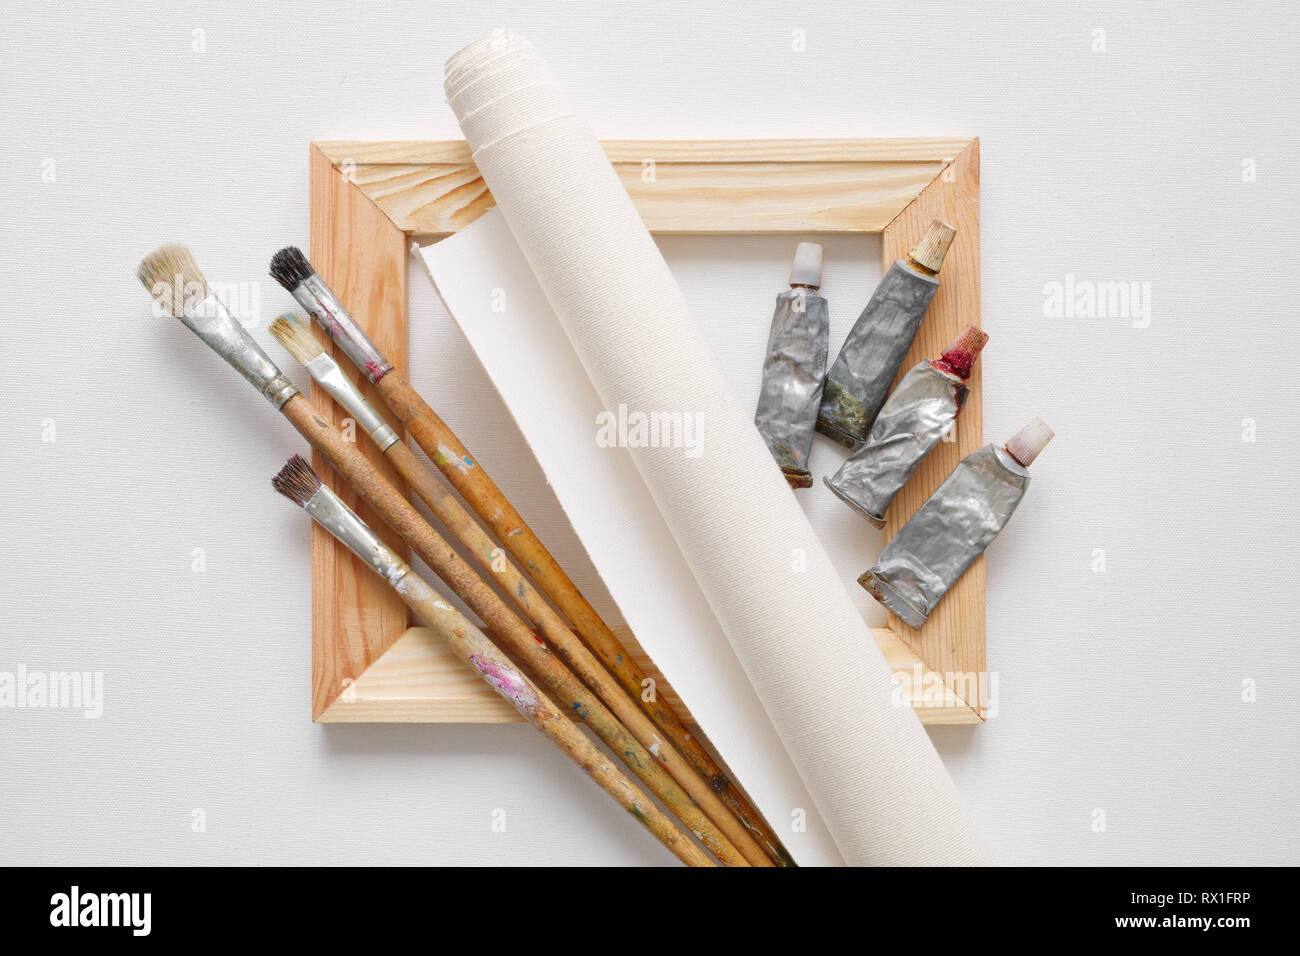 Wooden stretcher bar, paintbrushes, roll of artist canvas and paint tubes on white canvas background. Top view. Stock Photo